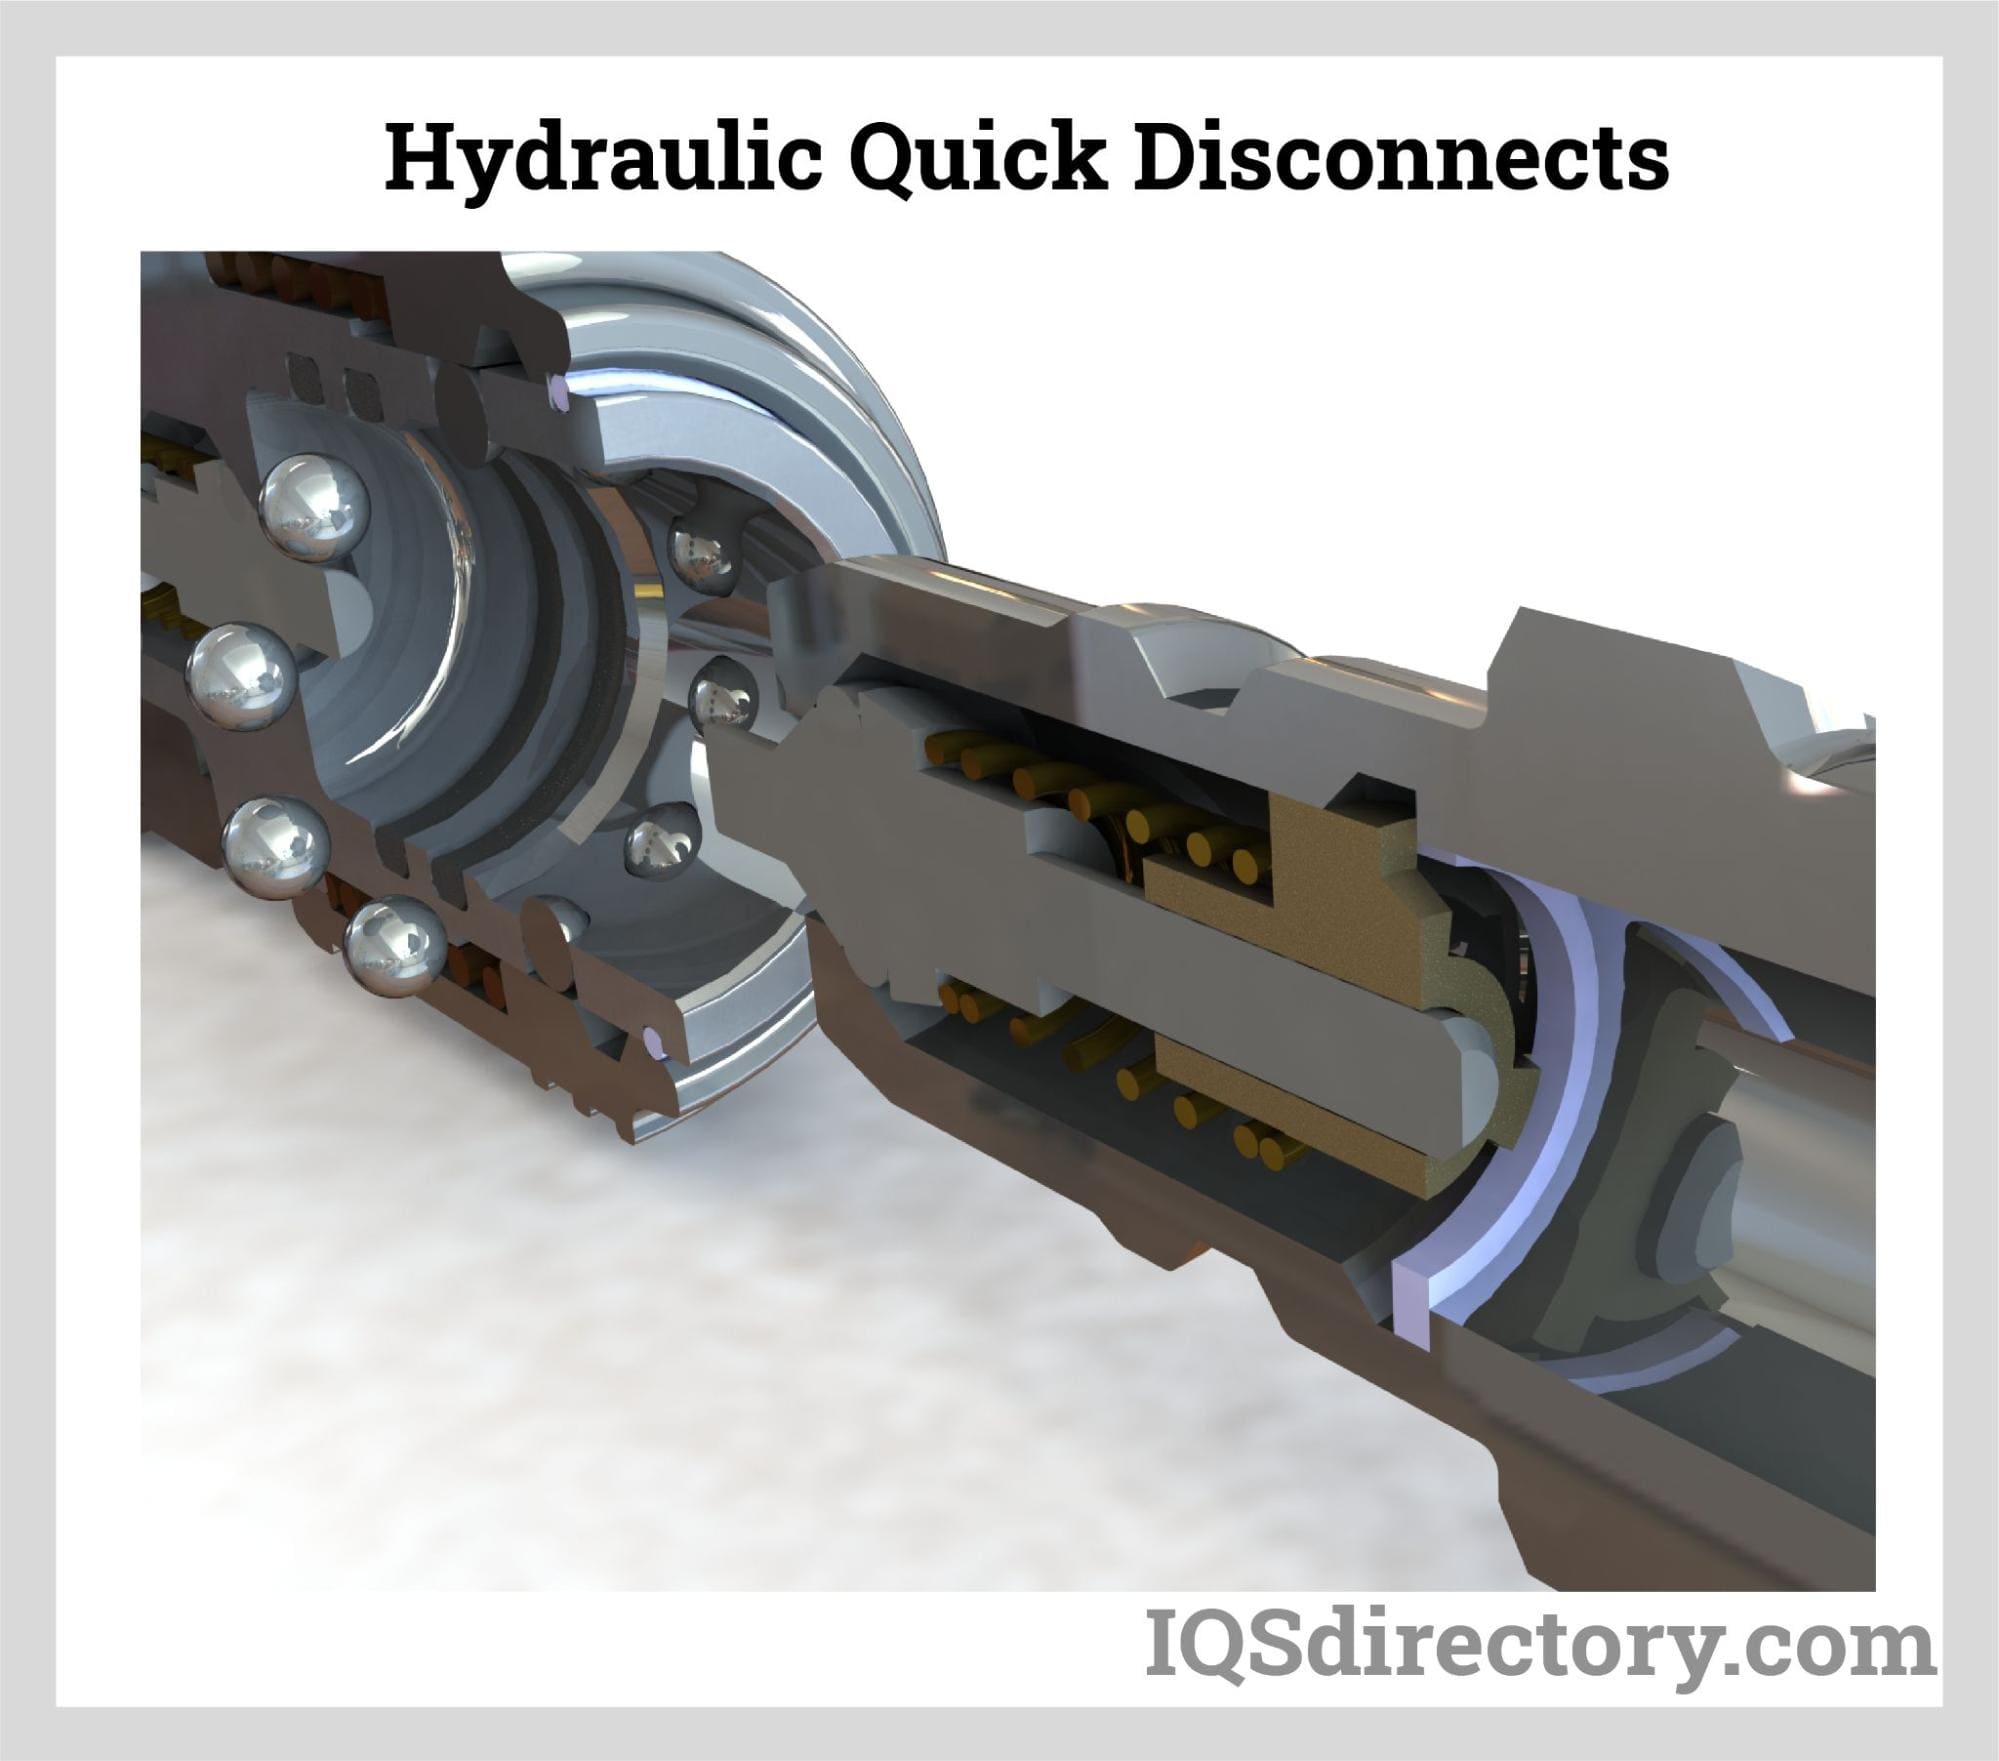 Hydraulic Quick Disconnects